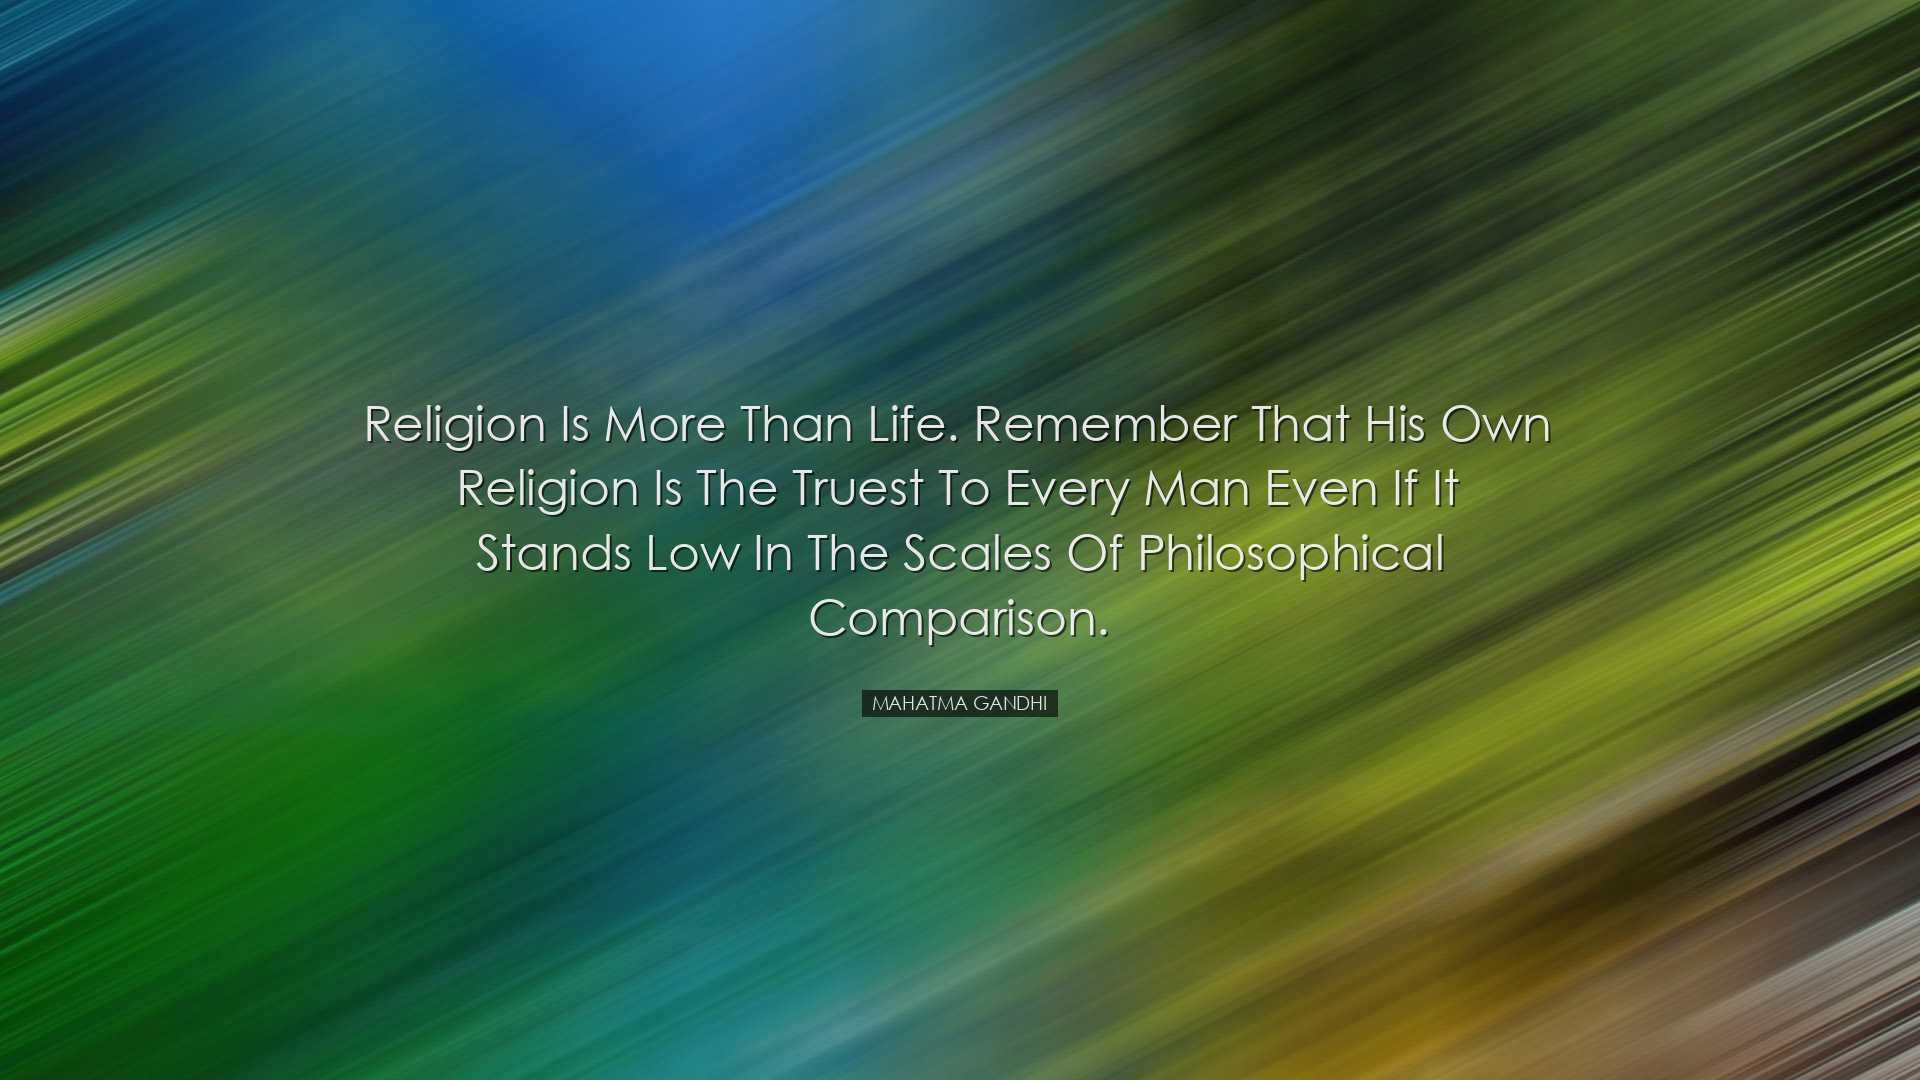 Religion is more than life. Remember that his own religion is the